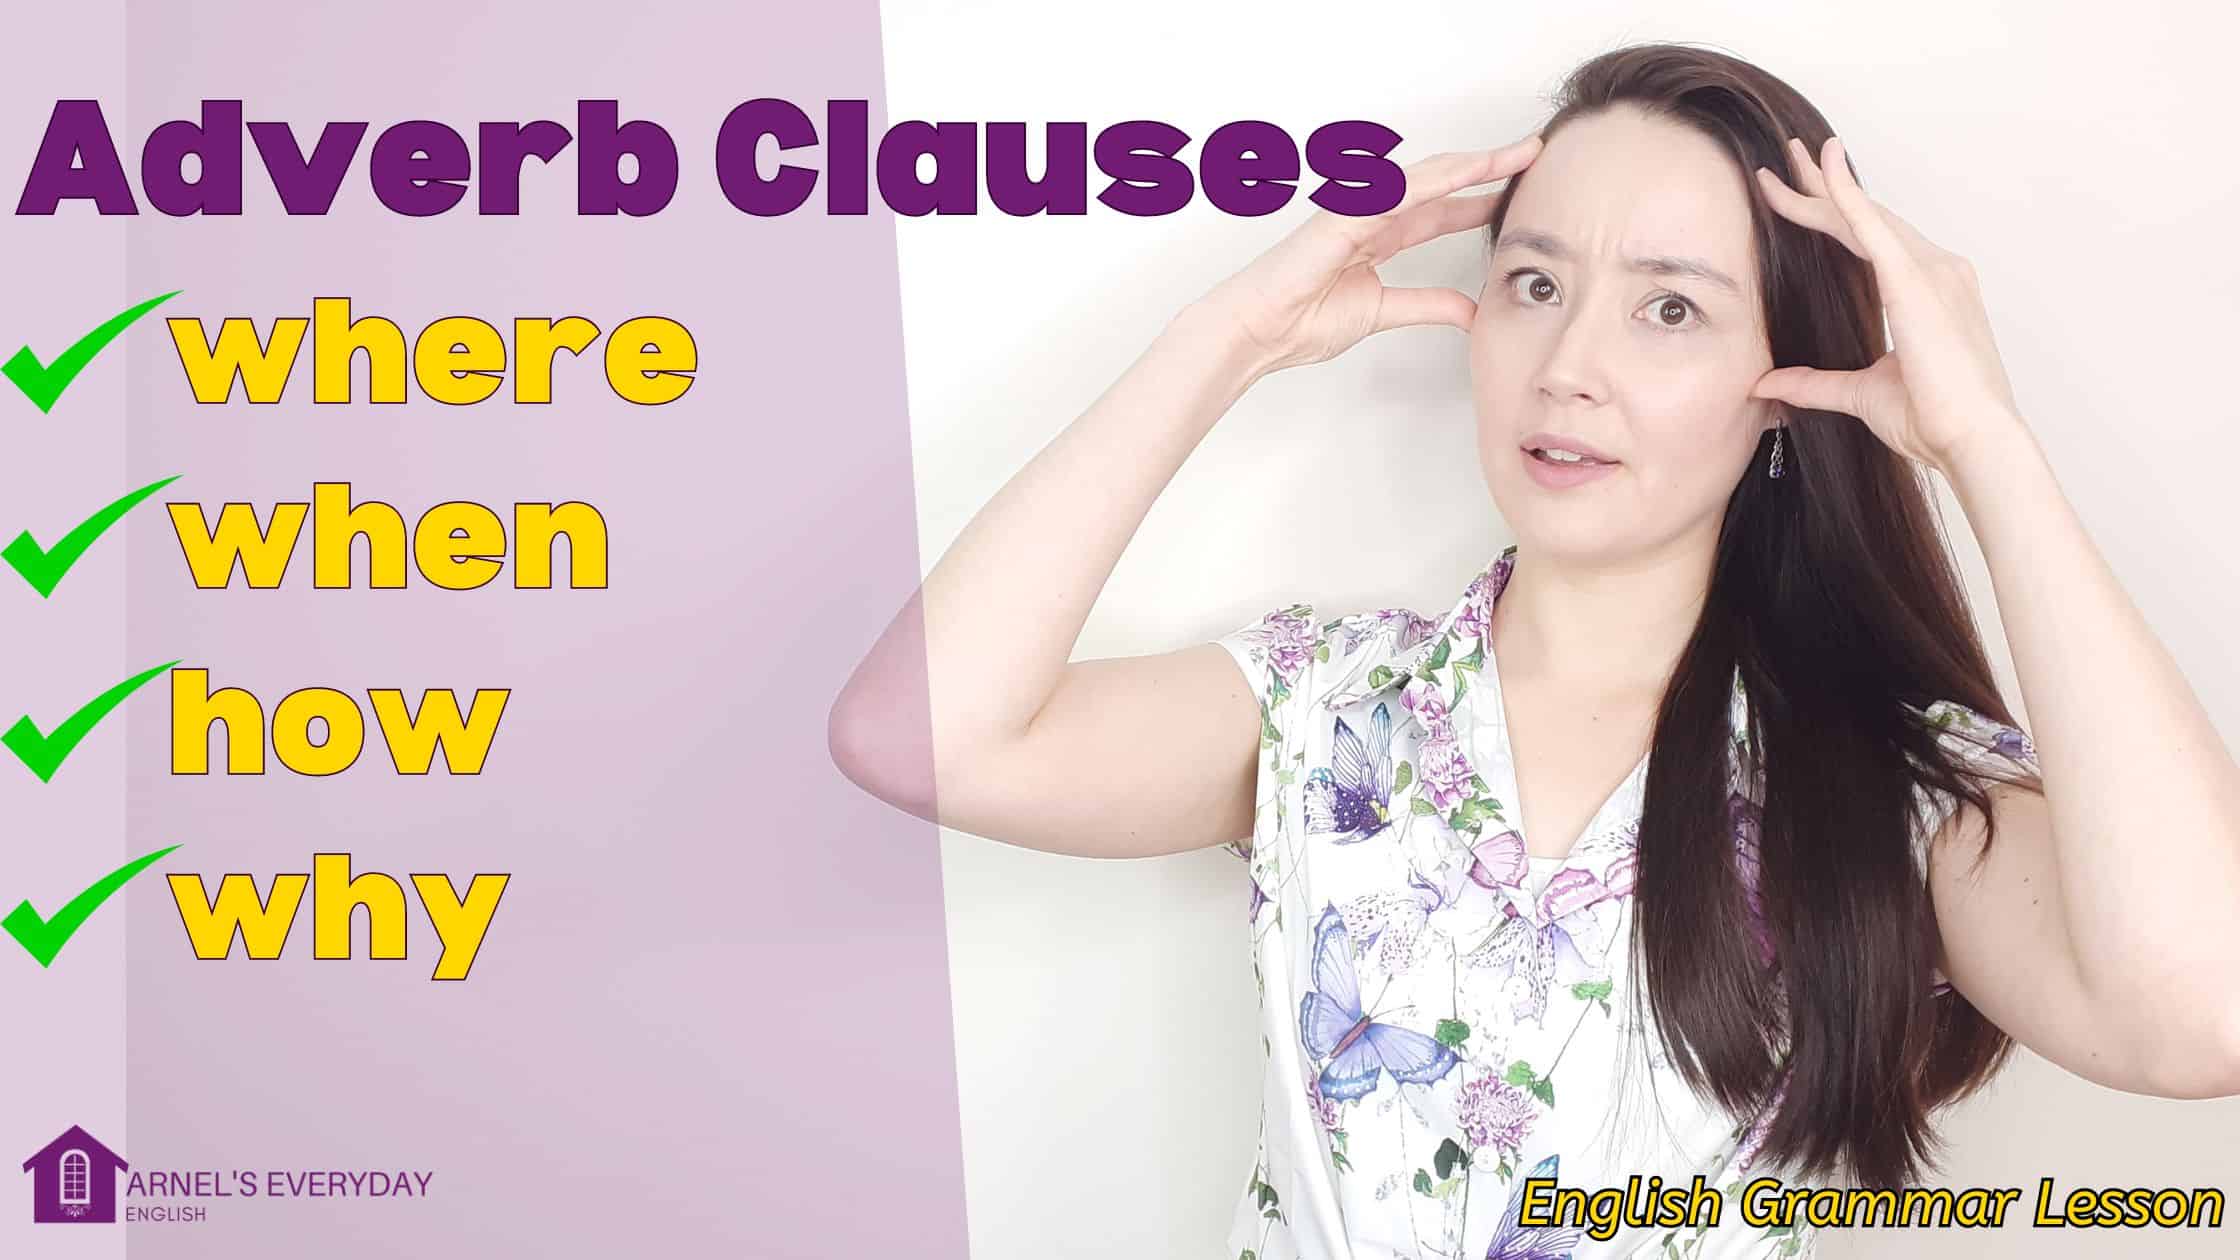 Adverb Clauses – where, when, how, why